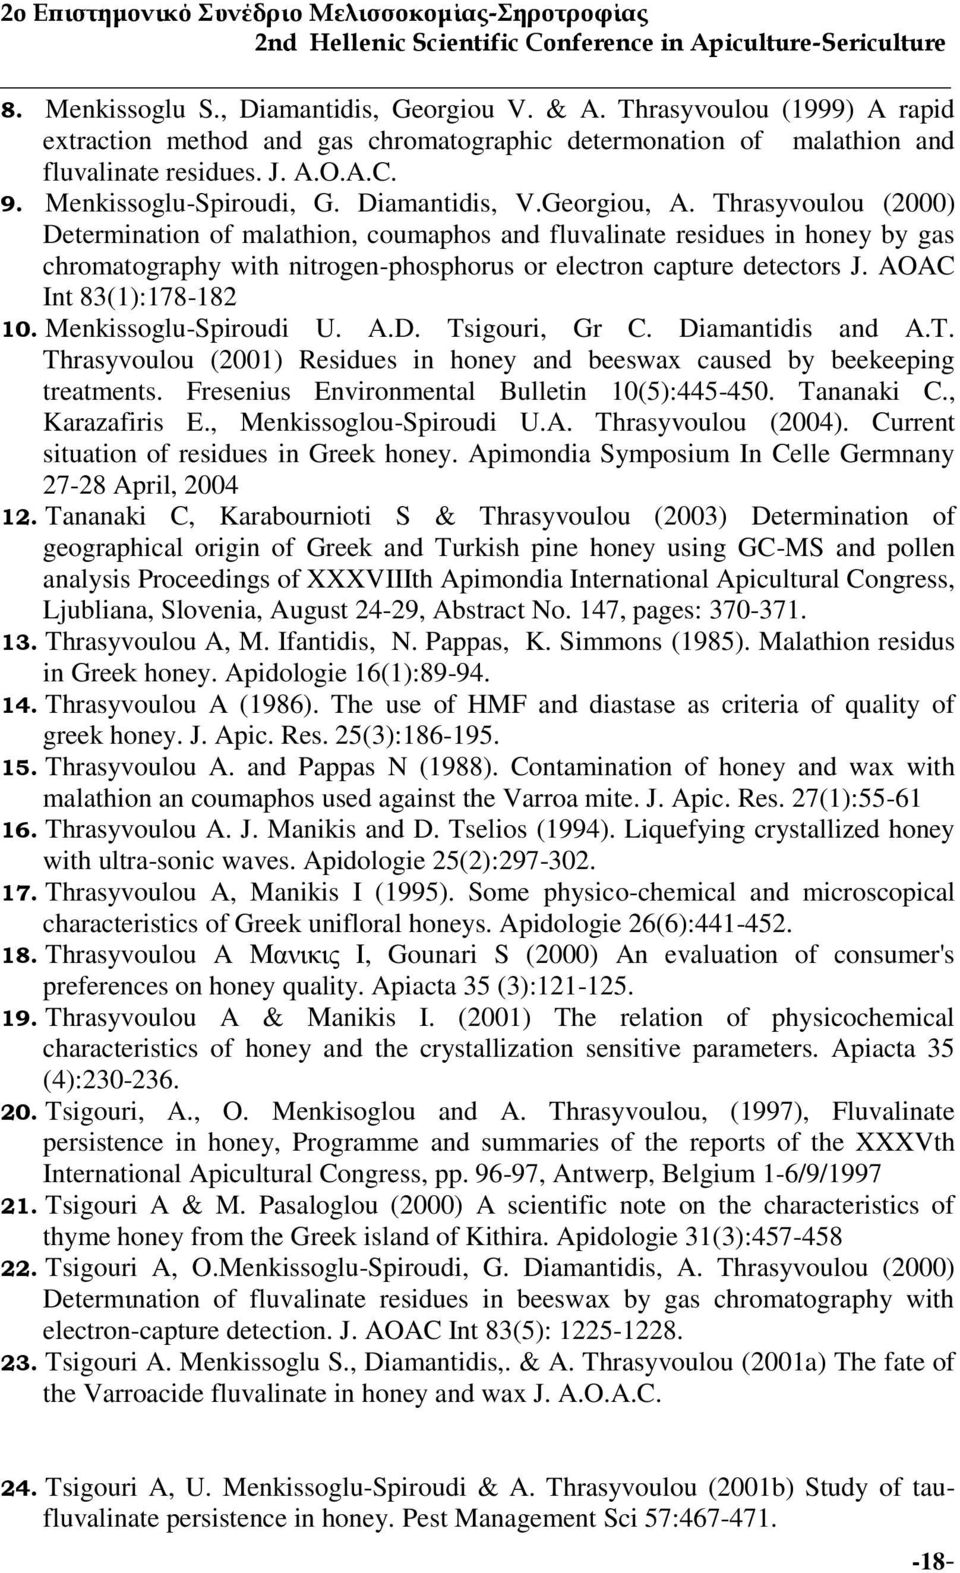 Thrasyvoulou (2000) Determination of malathion, coumaphos and fluvalinate residues in honey by gas chromatography with nitrogen-phosphorus or electron capture detectors J. AOAC Int 83(1):178-182 10.